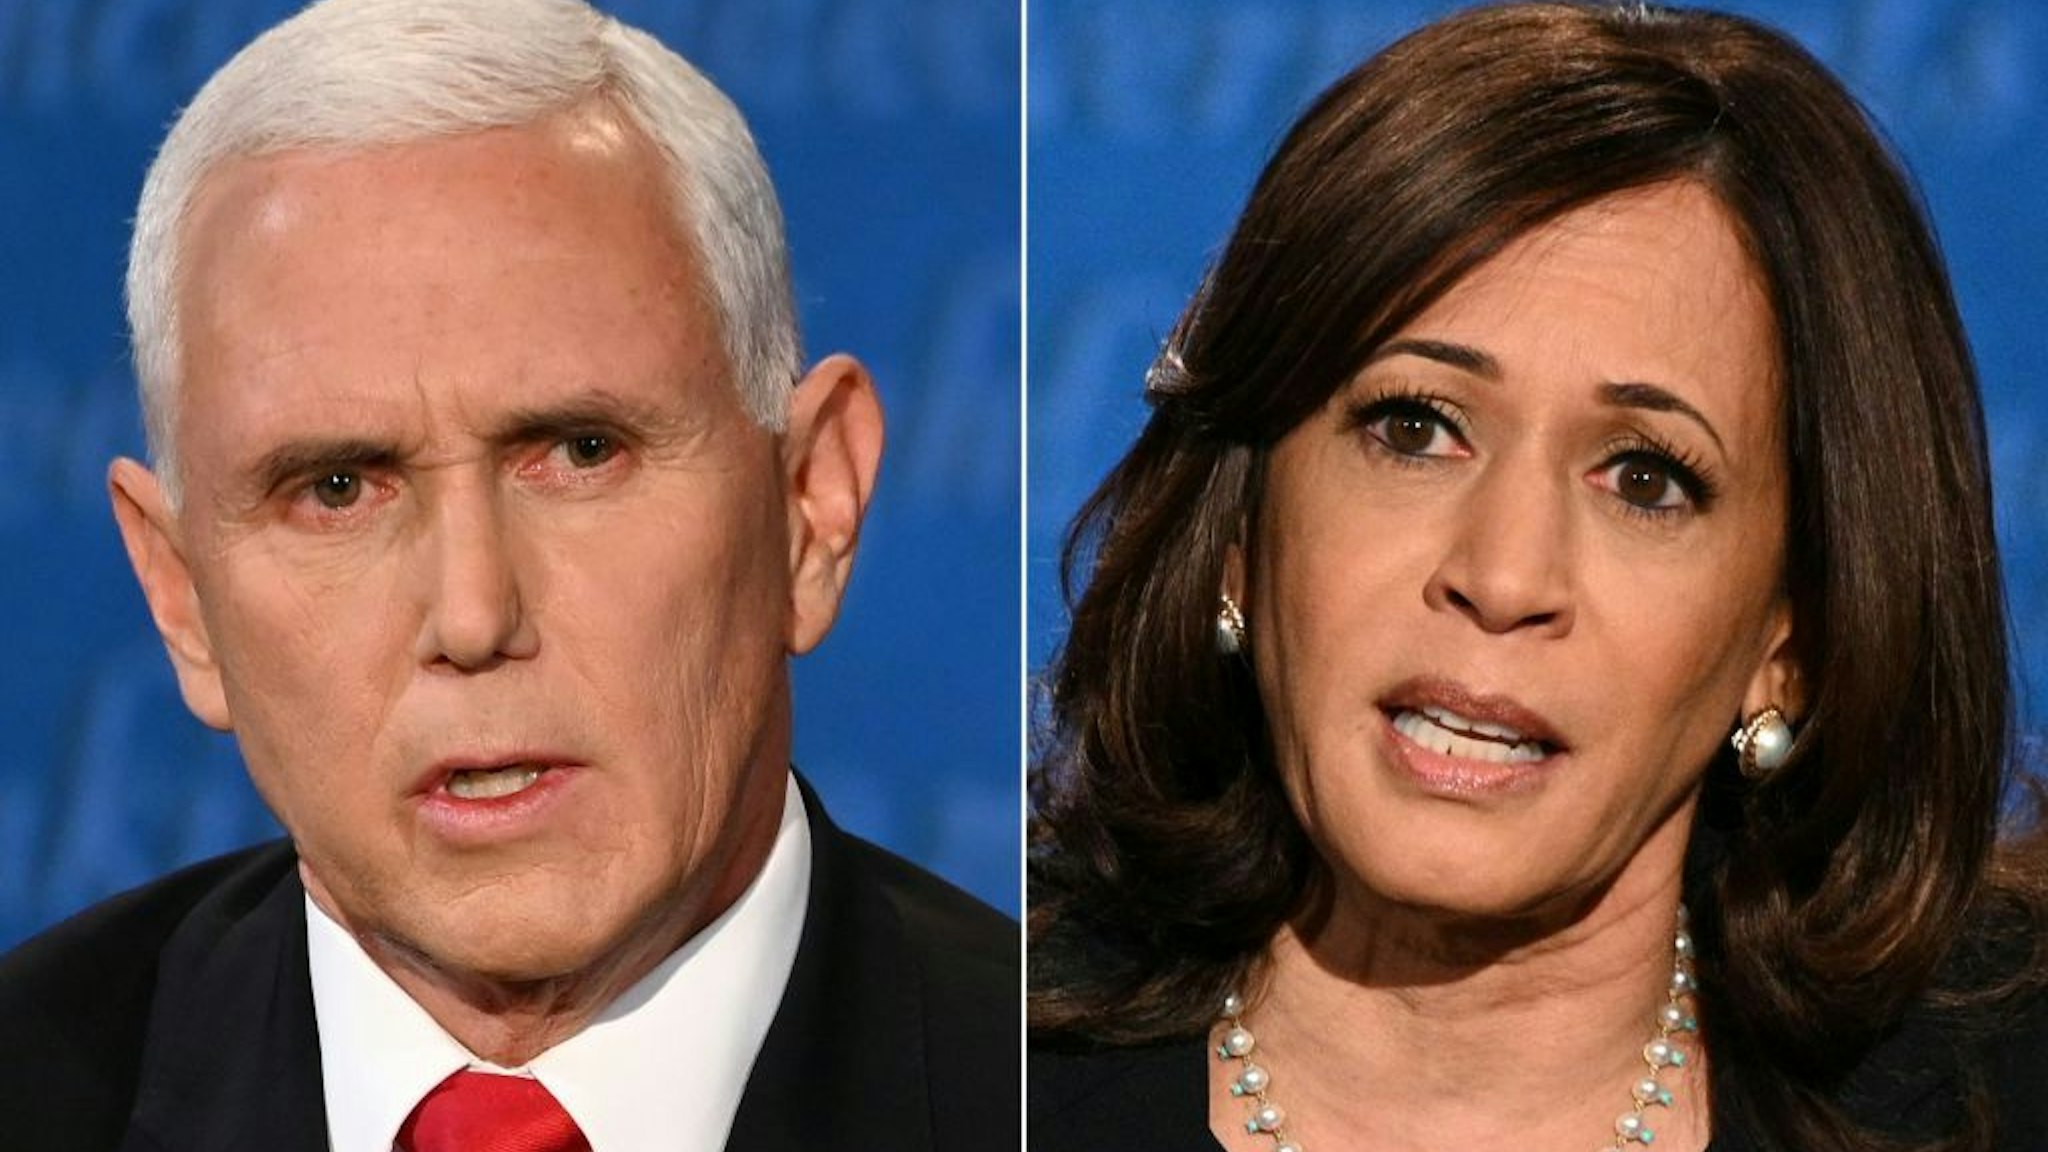 This combination of pictures created on October 07, 2020 shows US Vice President Mike Pence and US Democratic vice presidential nominee and Senator from California Kamala Harris during the vice presidential debate in Kingsbury Hall at the University of Utah on October 7, 2020 in Salt Lake City, Utah. (Photos by Eric BARADAT and Robyn Beck / AFP)